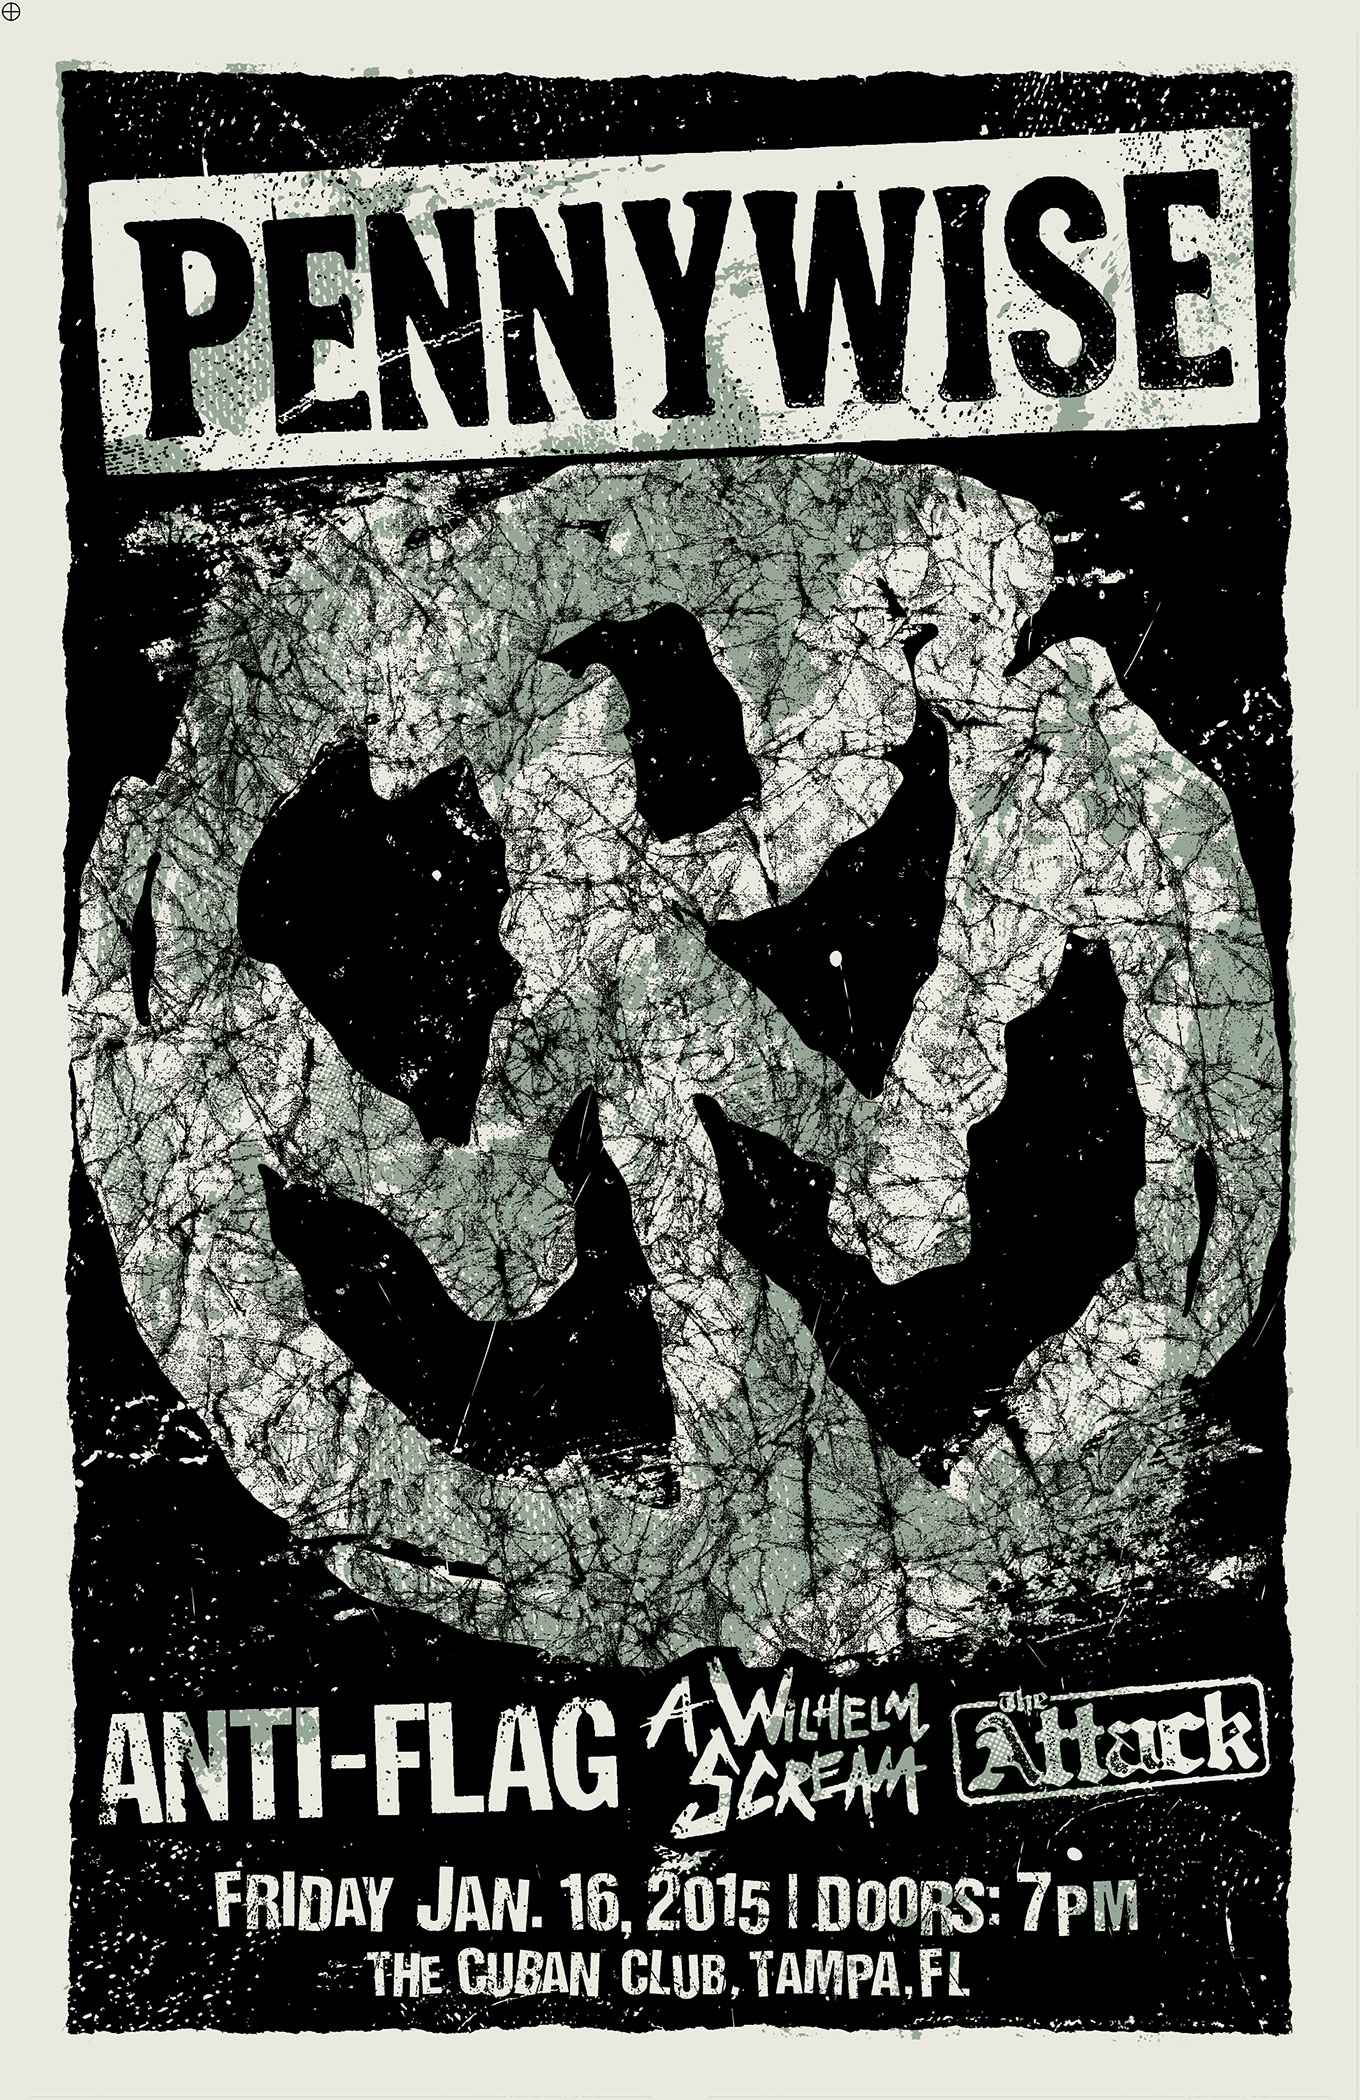 Pennywise_Anti-Flag_Attack_Jan16_poster